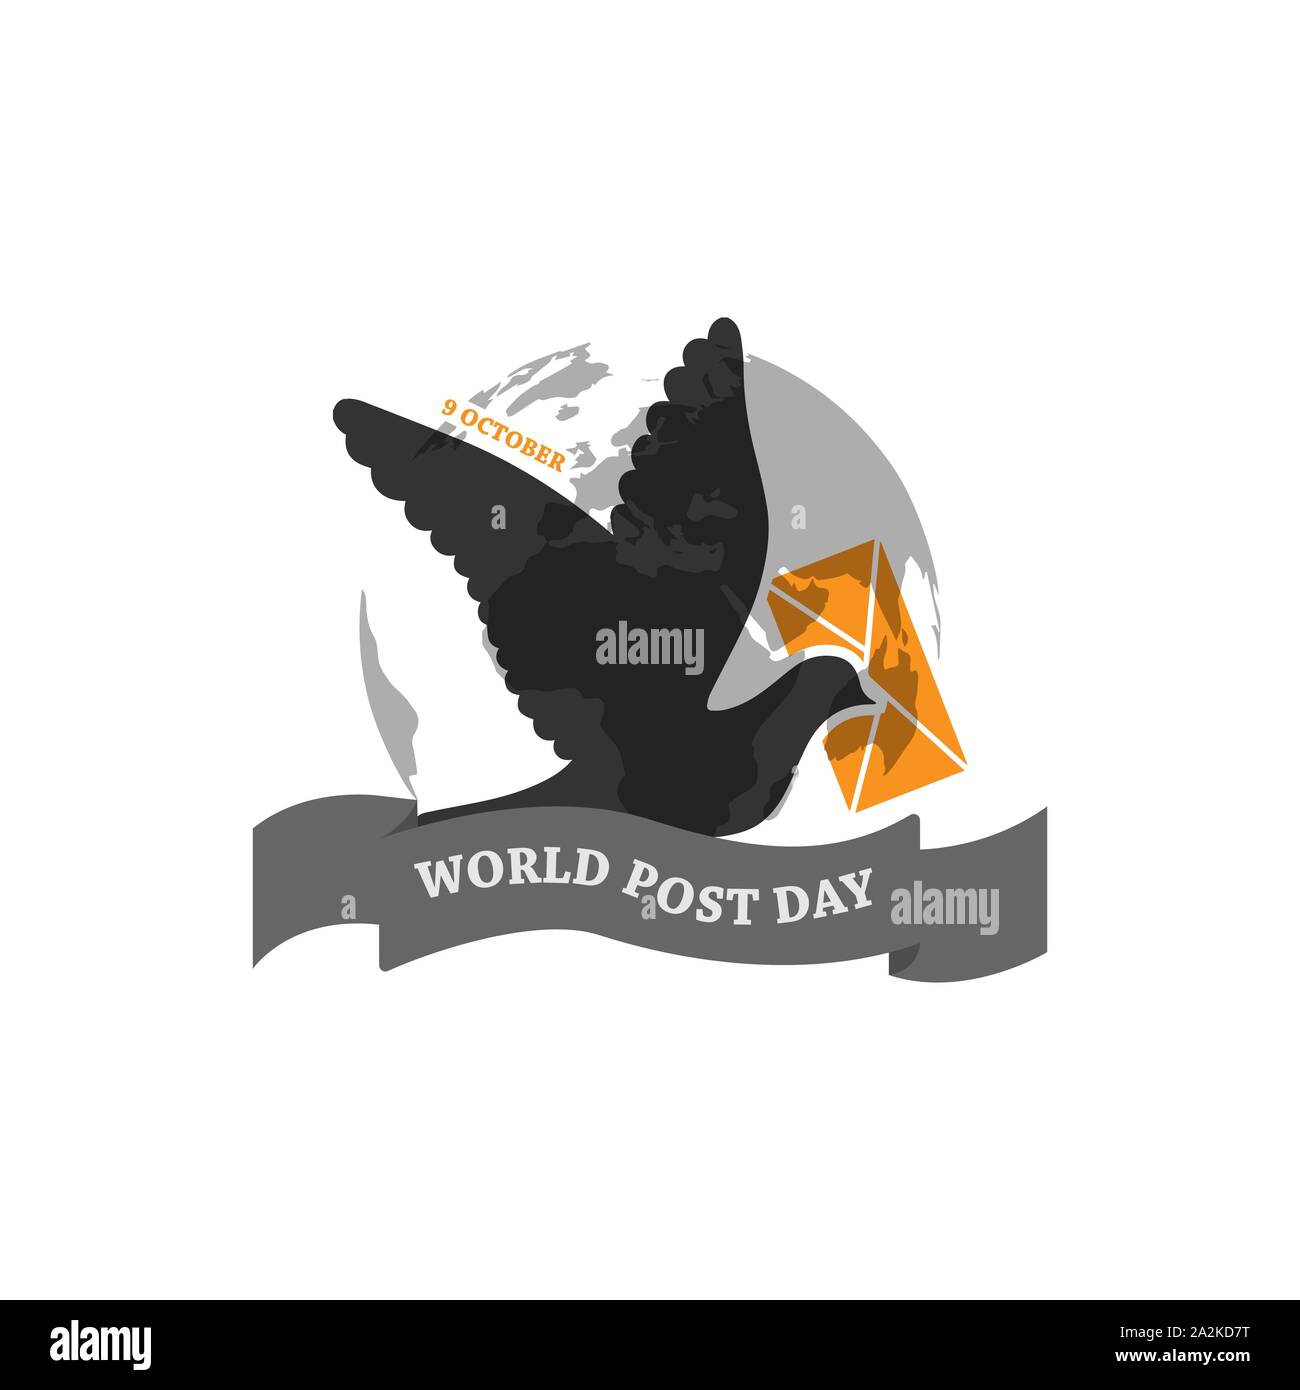 9 october world post day vector design image. world post day with post bird holding mail image vector Stock Vector